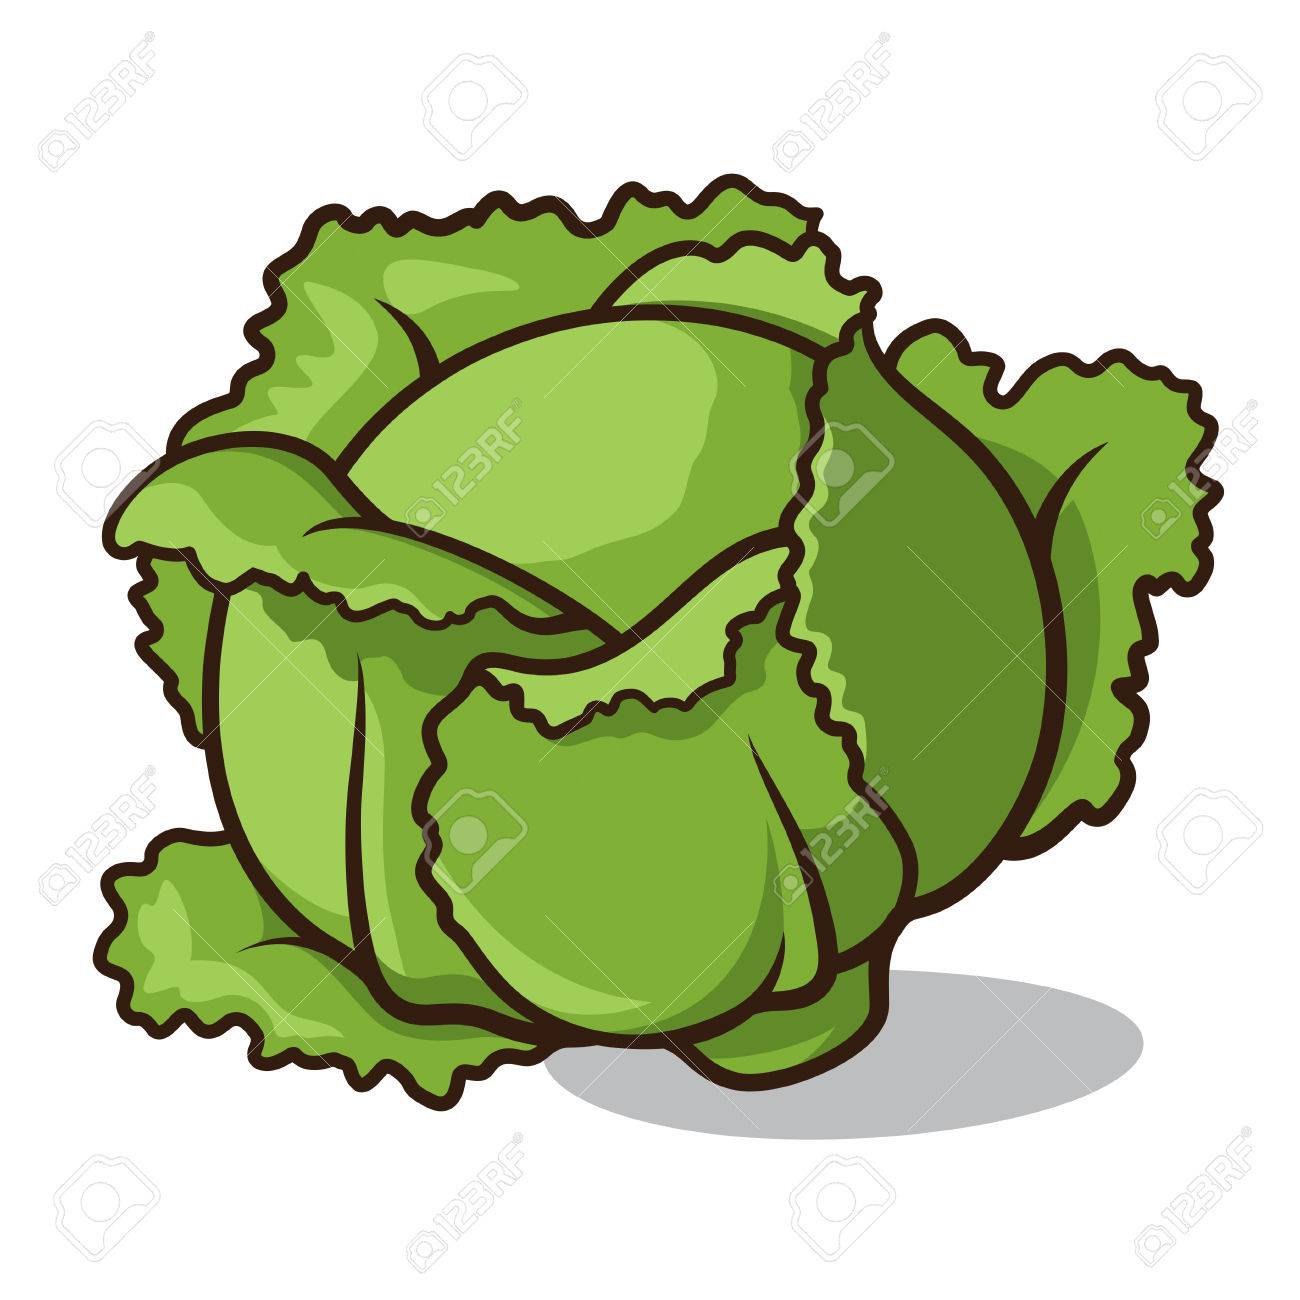 illustration of a cabbage isolated on a white background